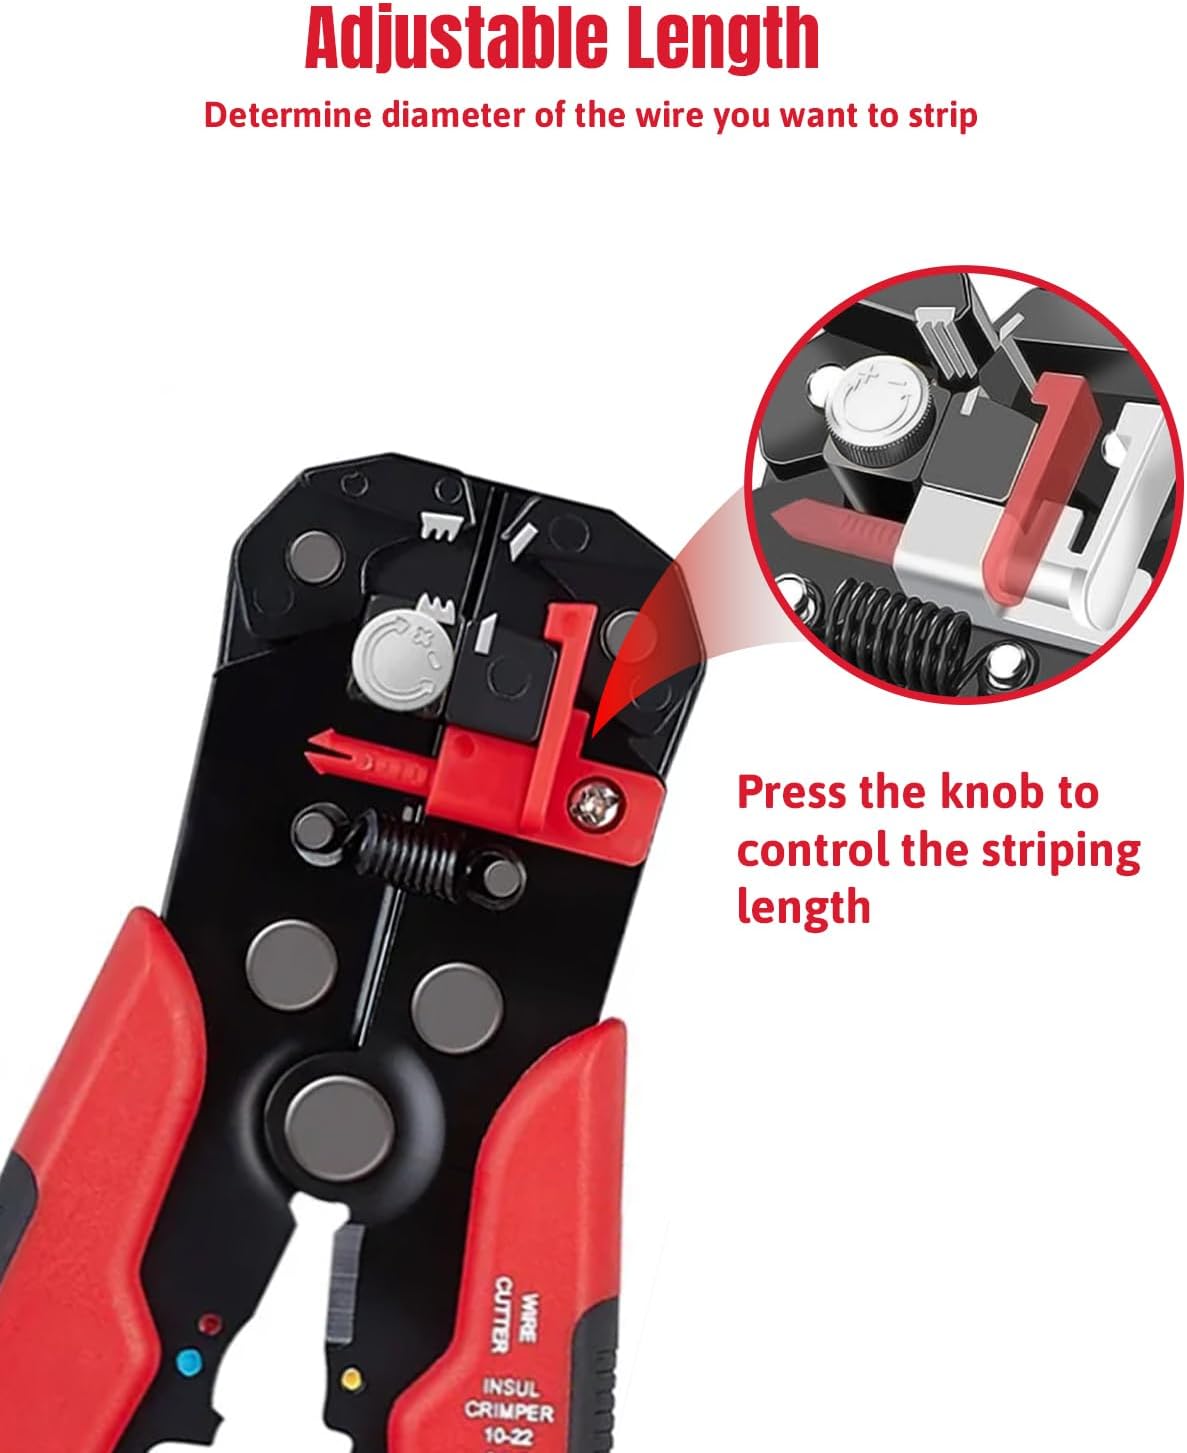 A red and black wire stripper with adjustable length for electrical purposes.